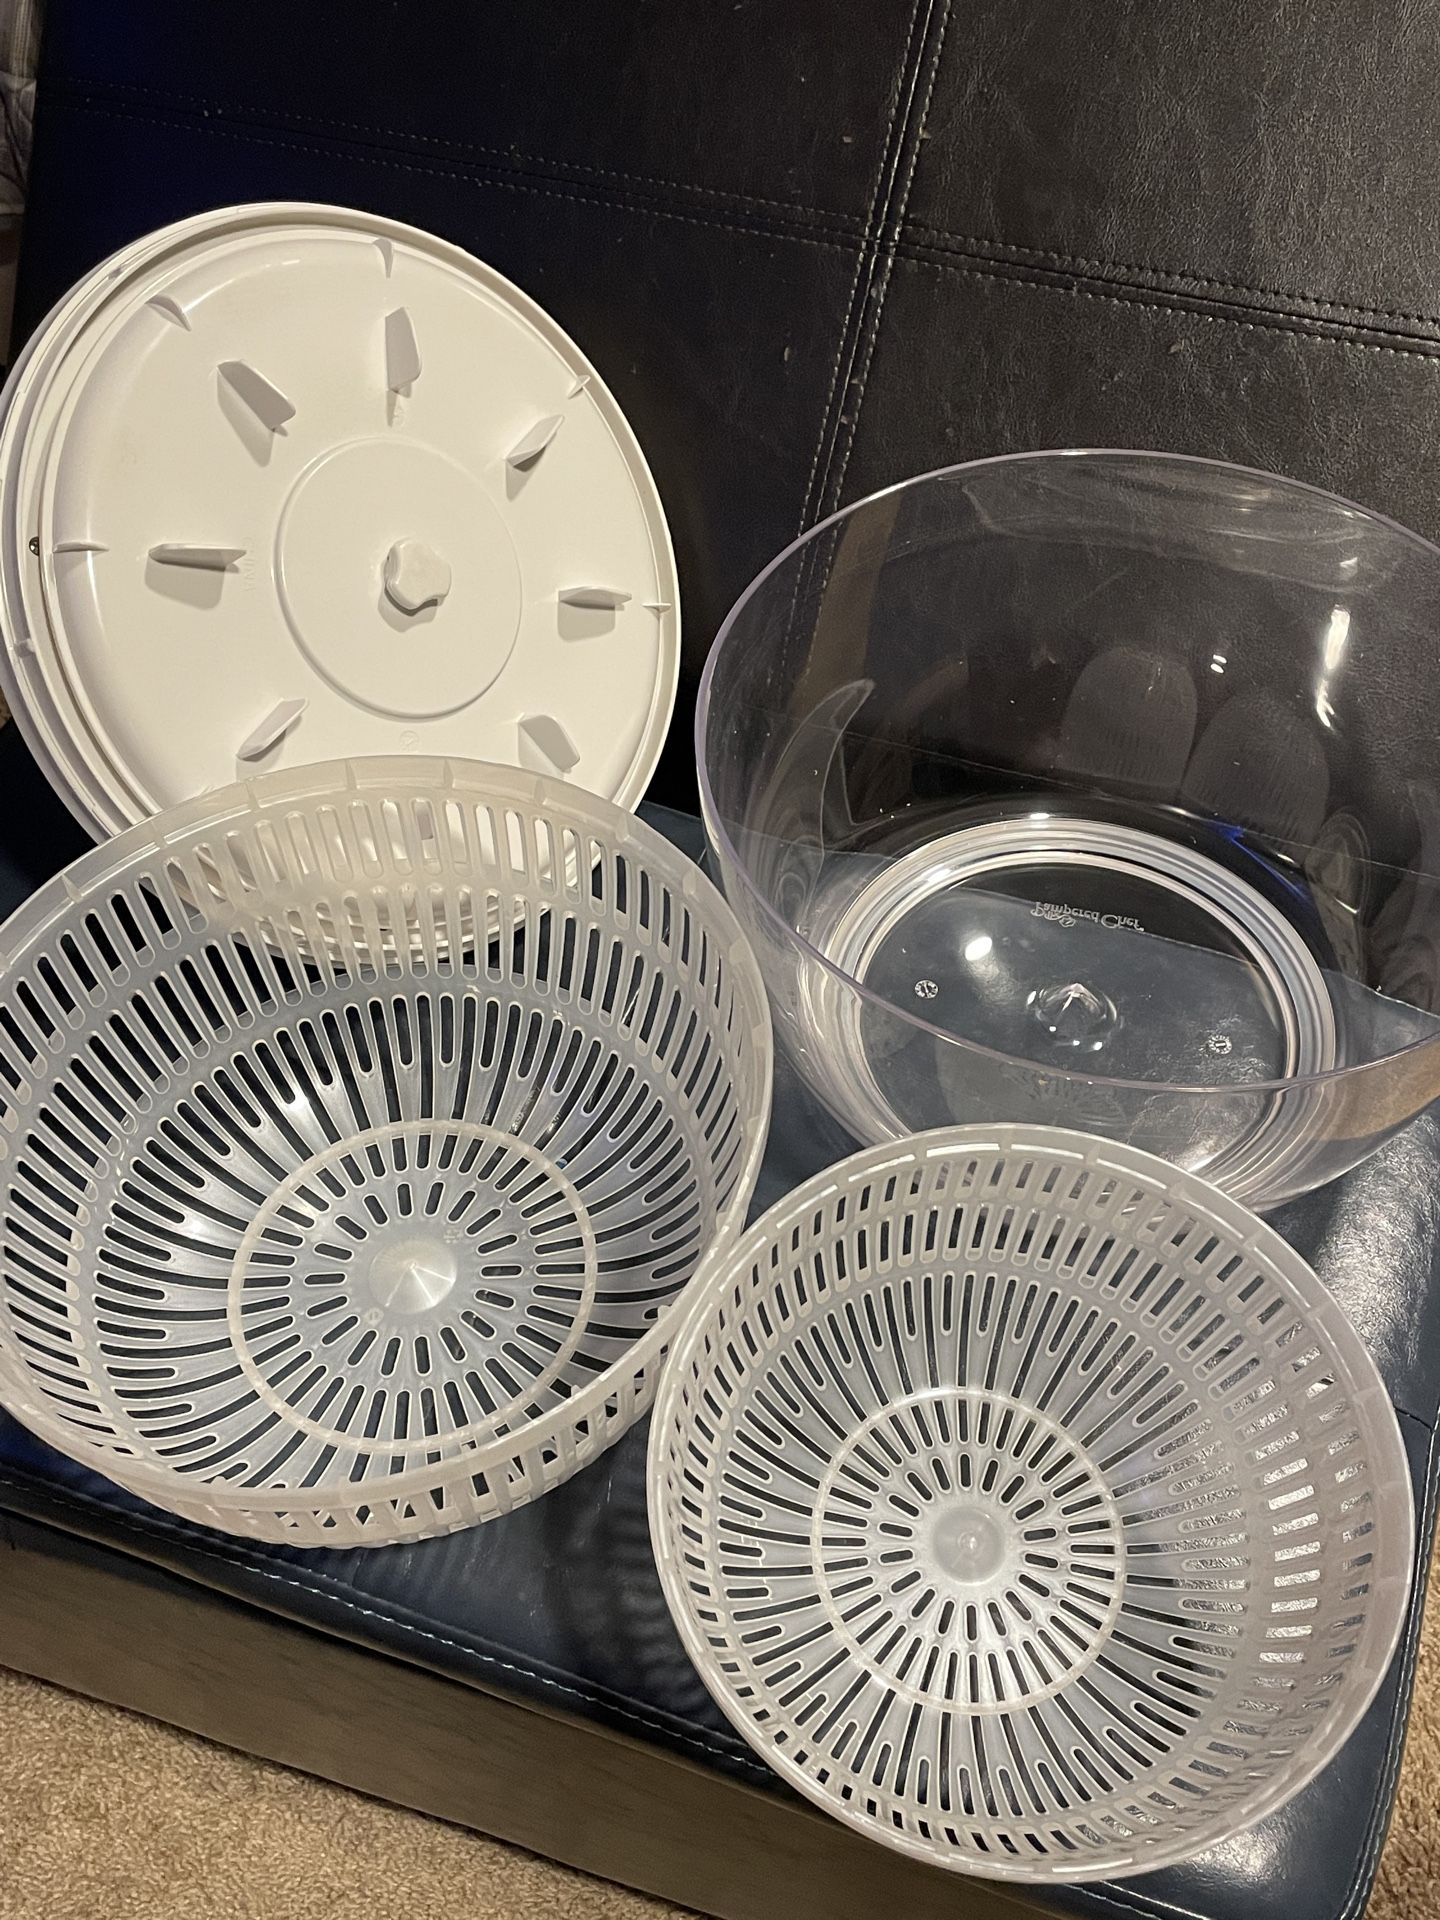 Cuisinart Salad Spinner Big for Sale in Bloomingdale, IL - OfferUp